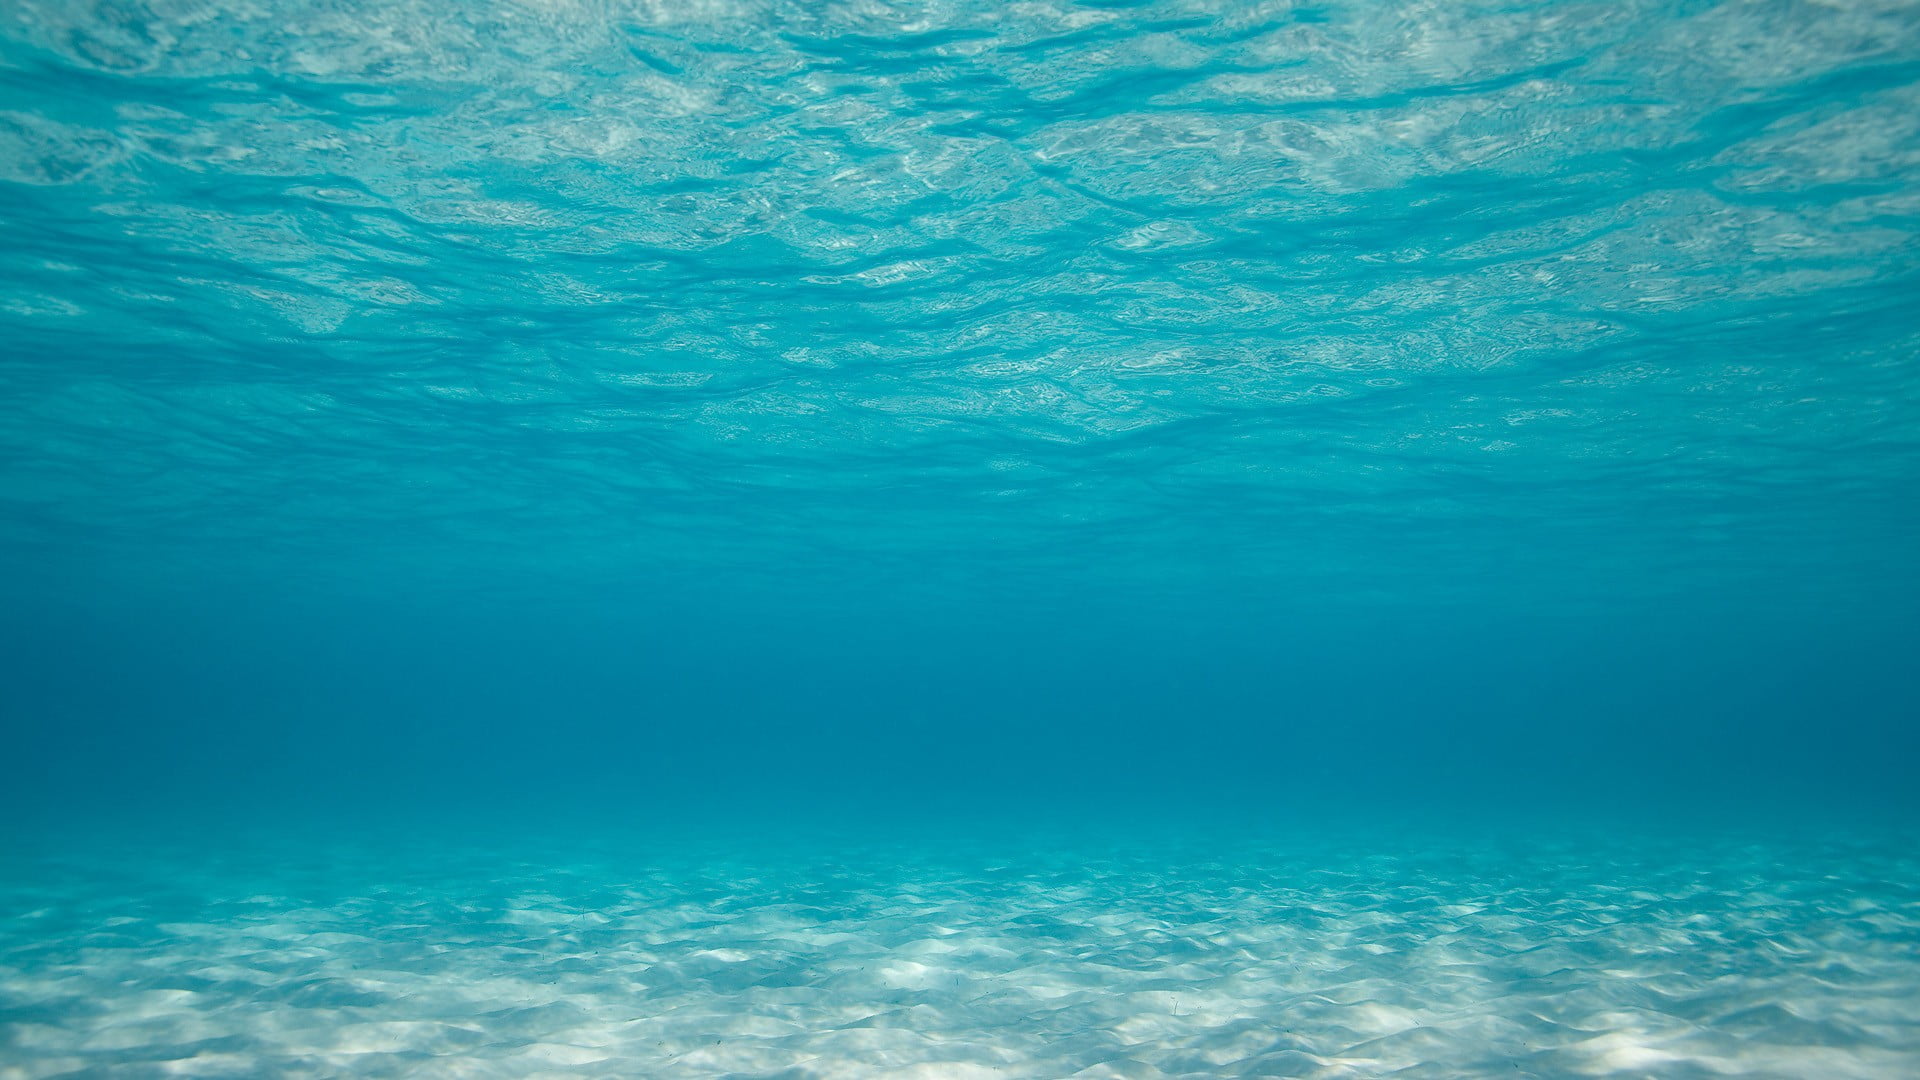 rippling body of water, photography, sea, water, underwater